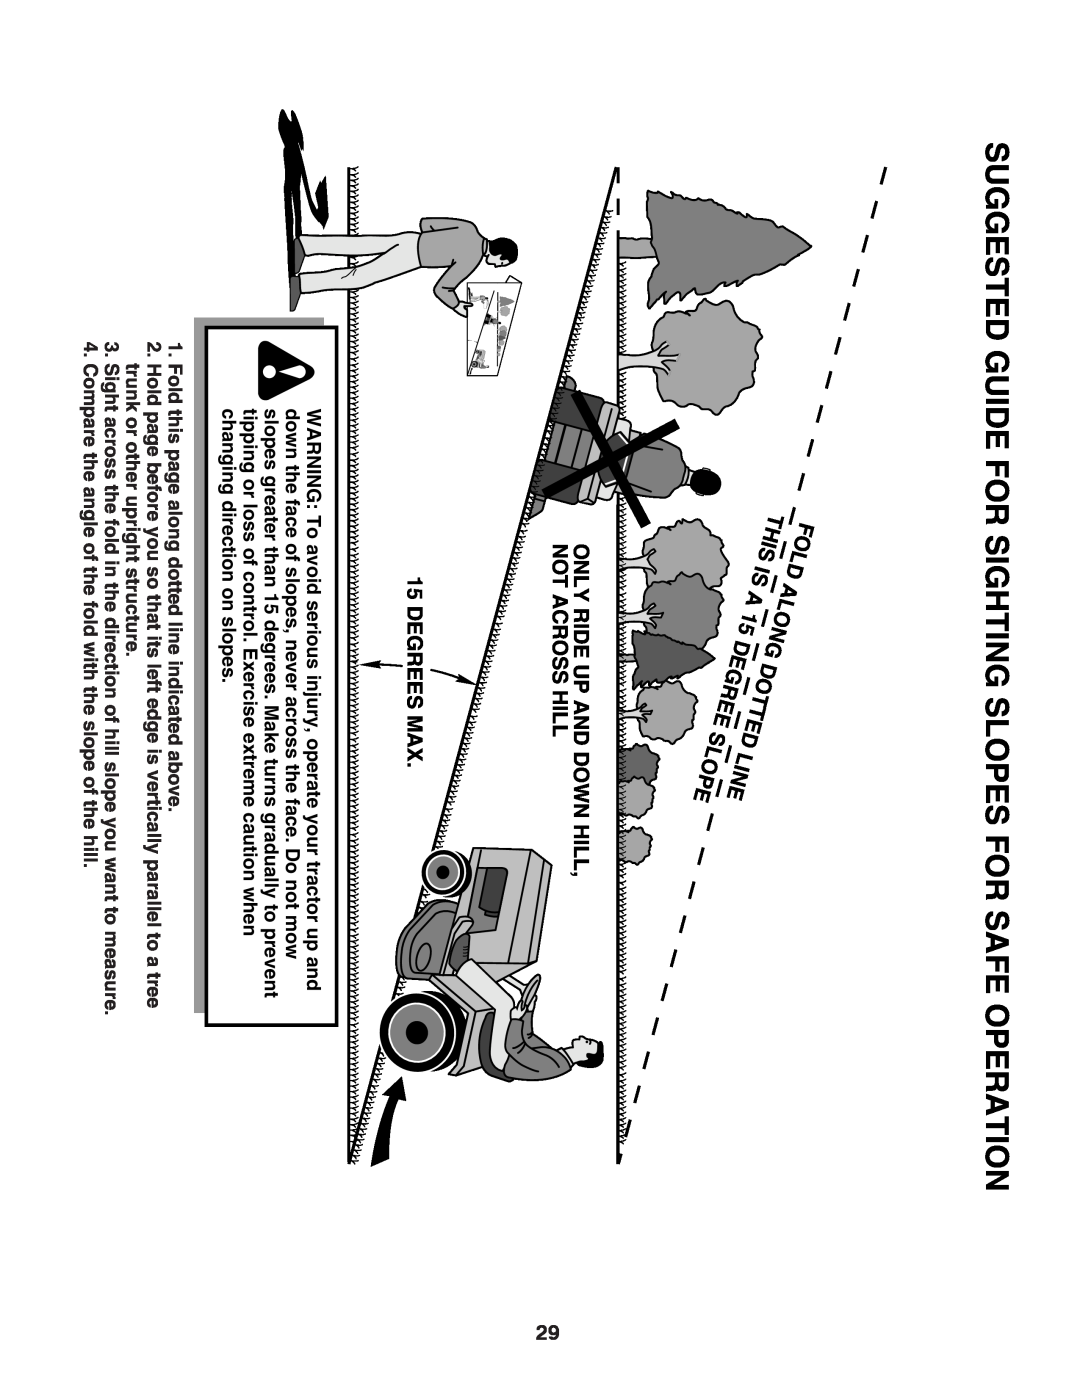 Poulan 96042003505 manual Suggested Guide For Sighting Slopes For Safe Operation, Fold, Alon, Dotted, Line, Lope 